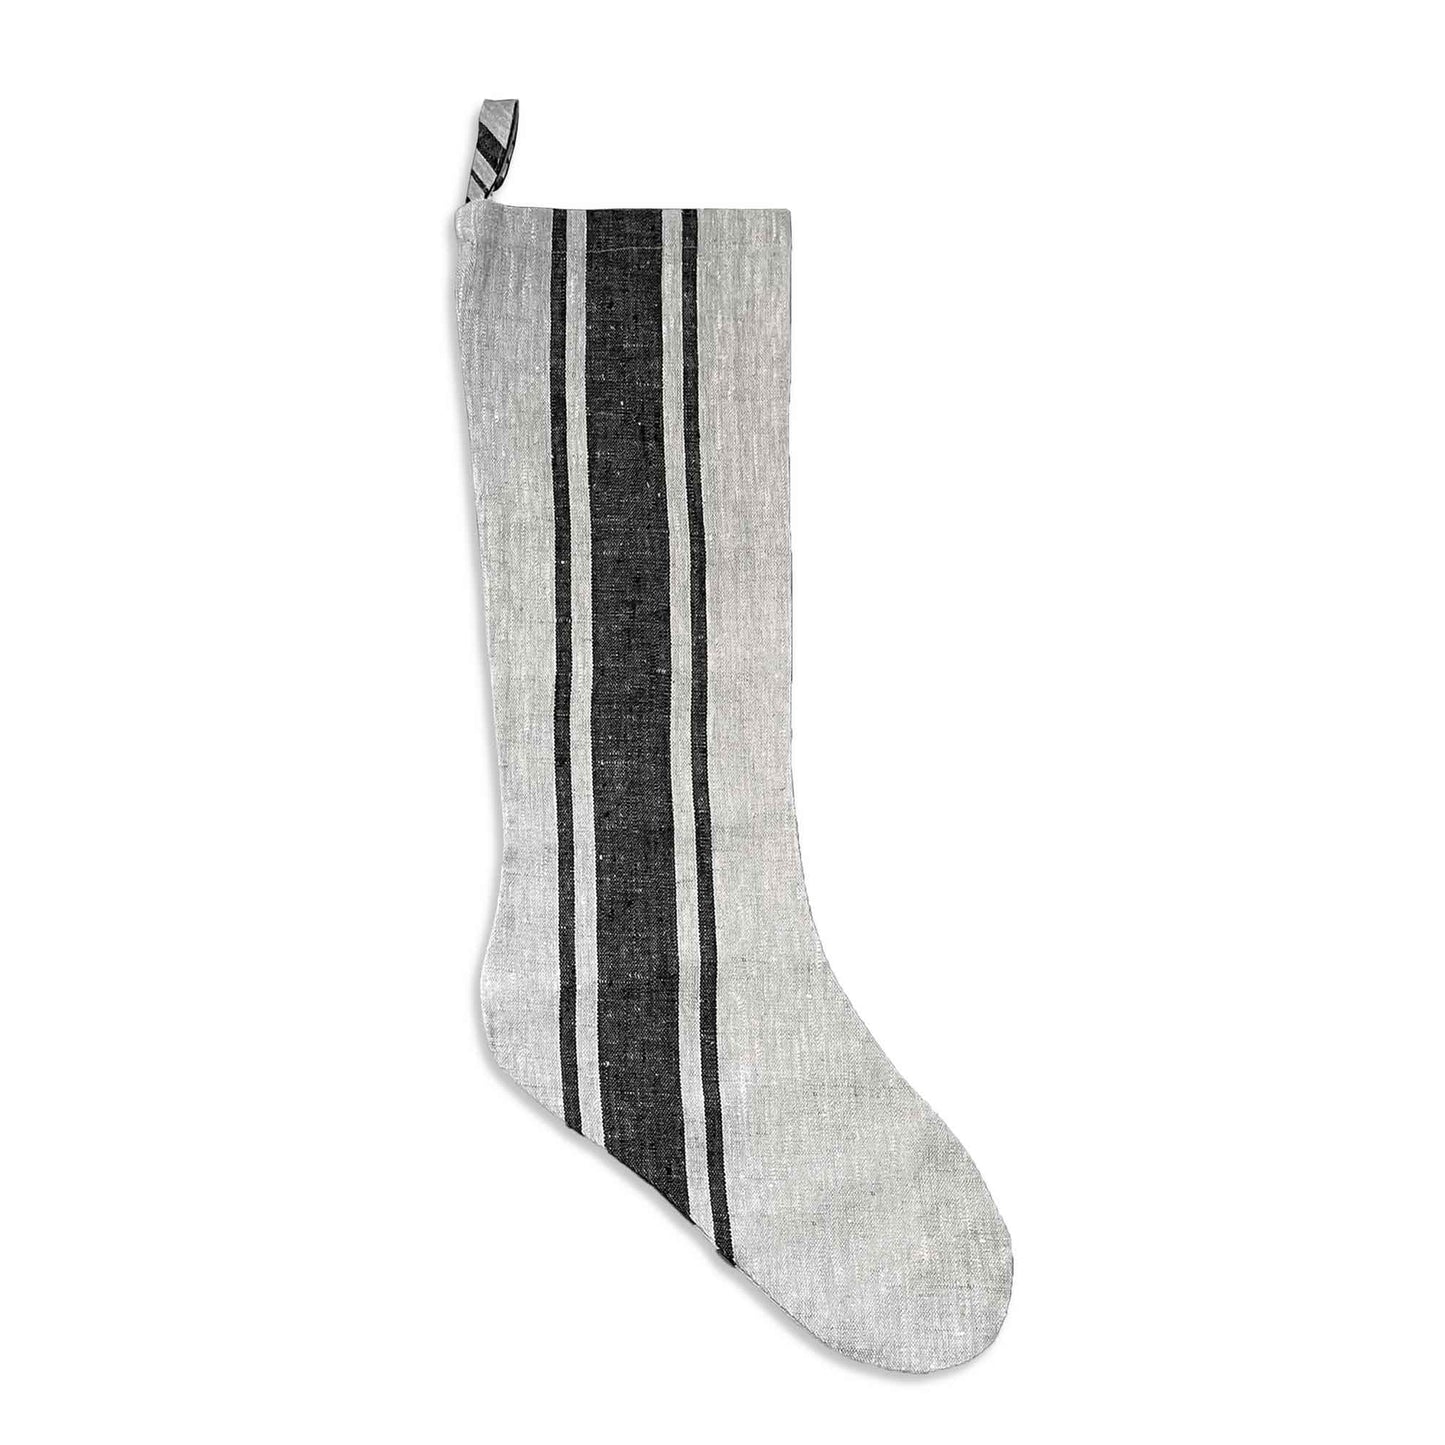 South Hous Scandinavian style Linen Holiday Stockings flat lay product shot in wide stripe.